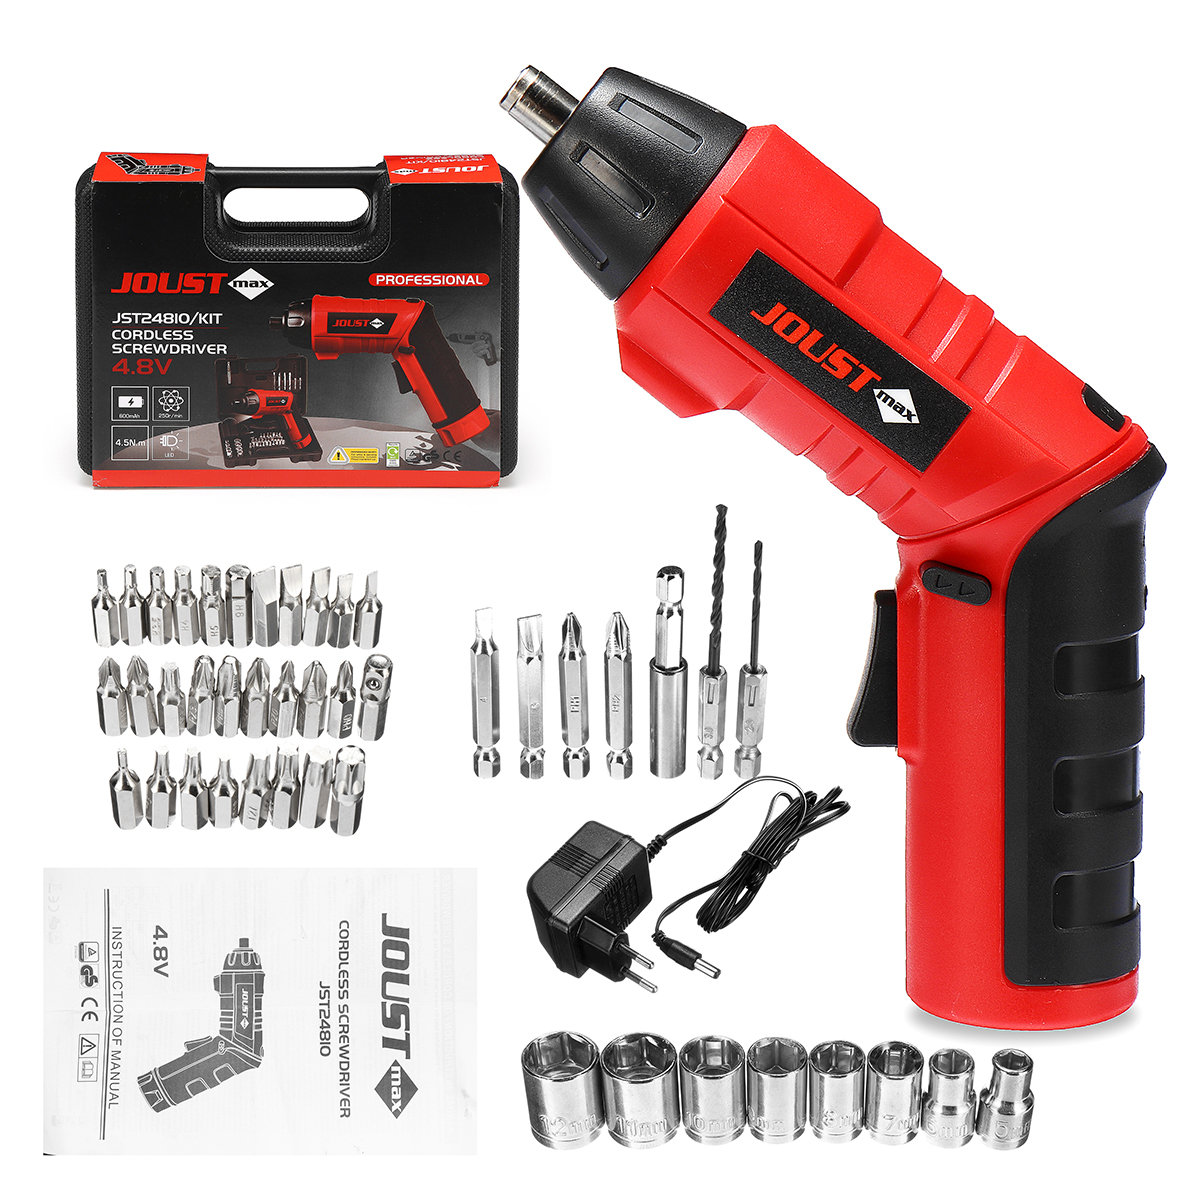 45 In 1 Kit 4.8V Cordless Electric Screwdriver Power Drills Tool Bit Set with Charger/Case